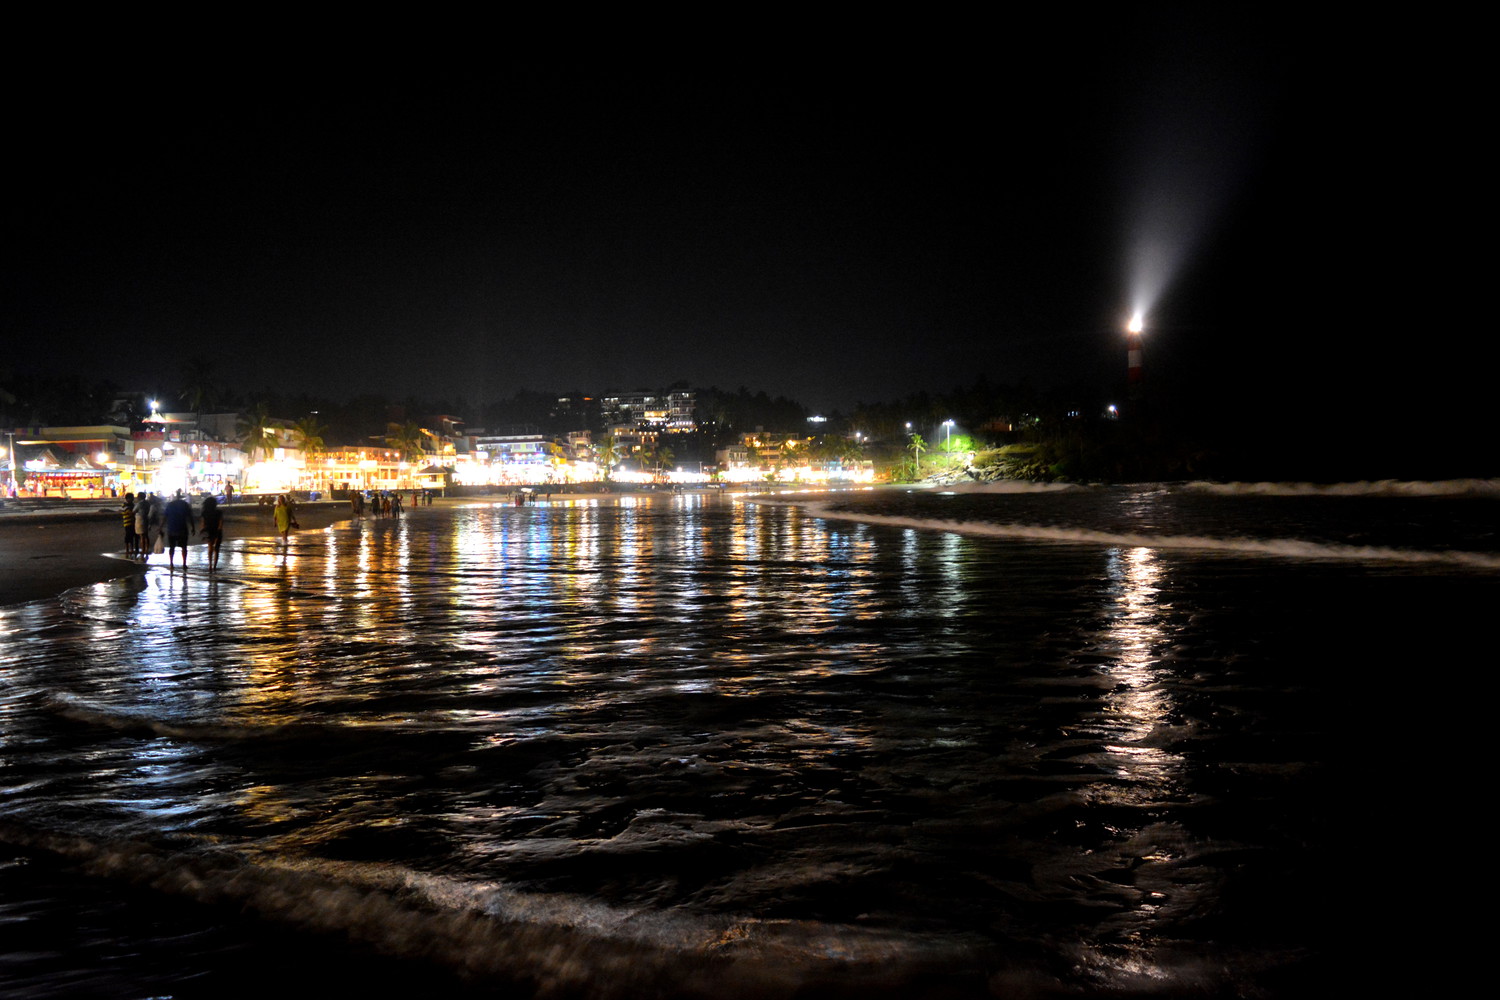 Sea beach at night with the lights from many shops and lighthouse emitting light visible in the background